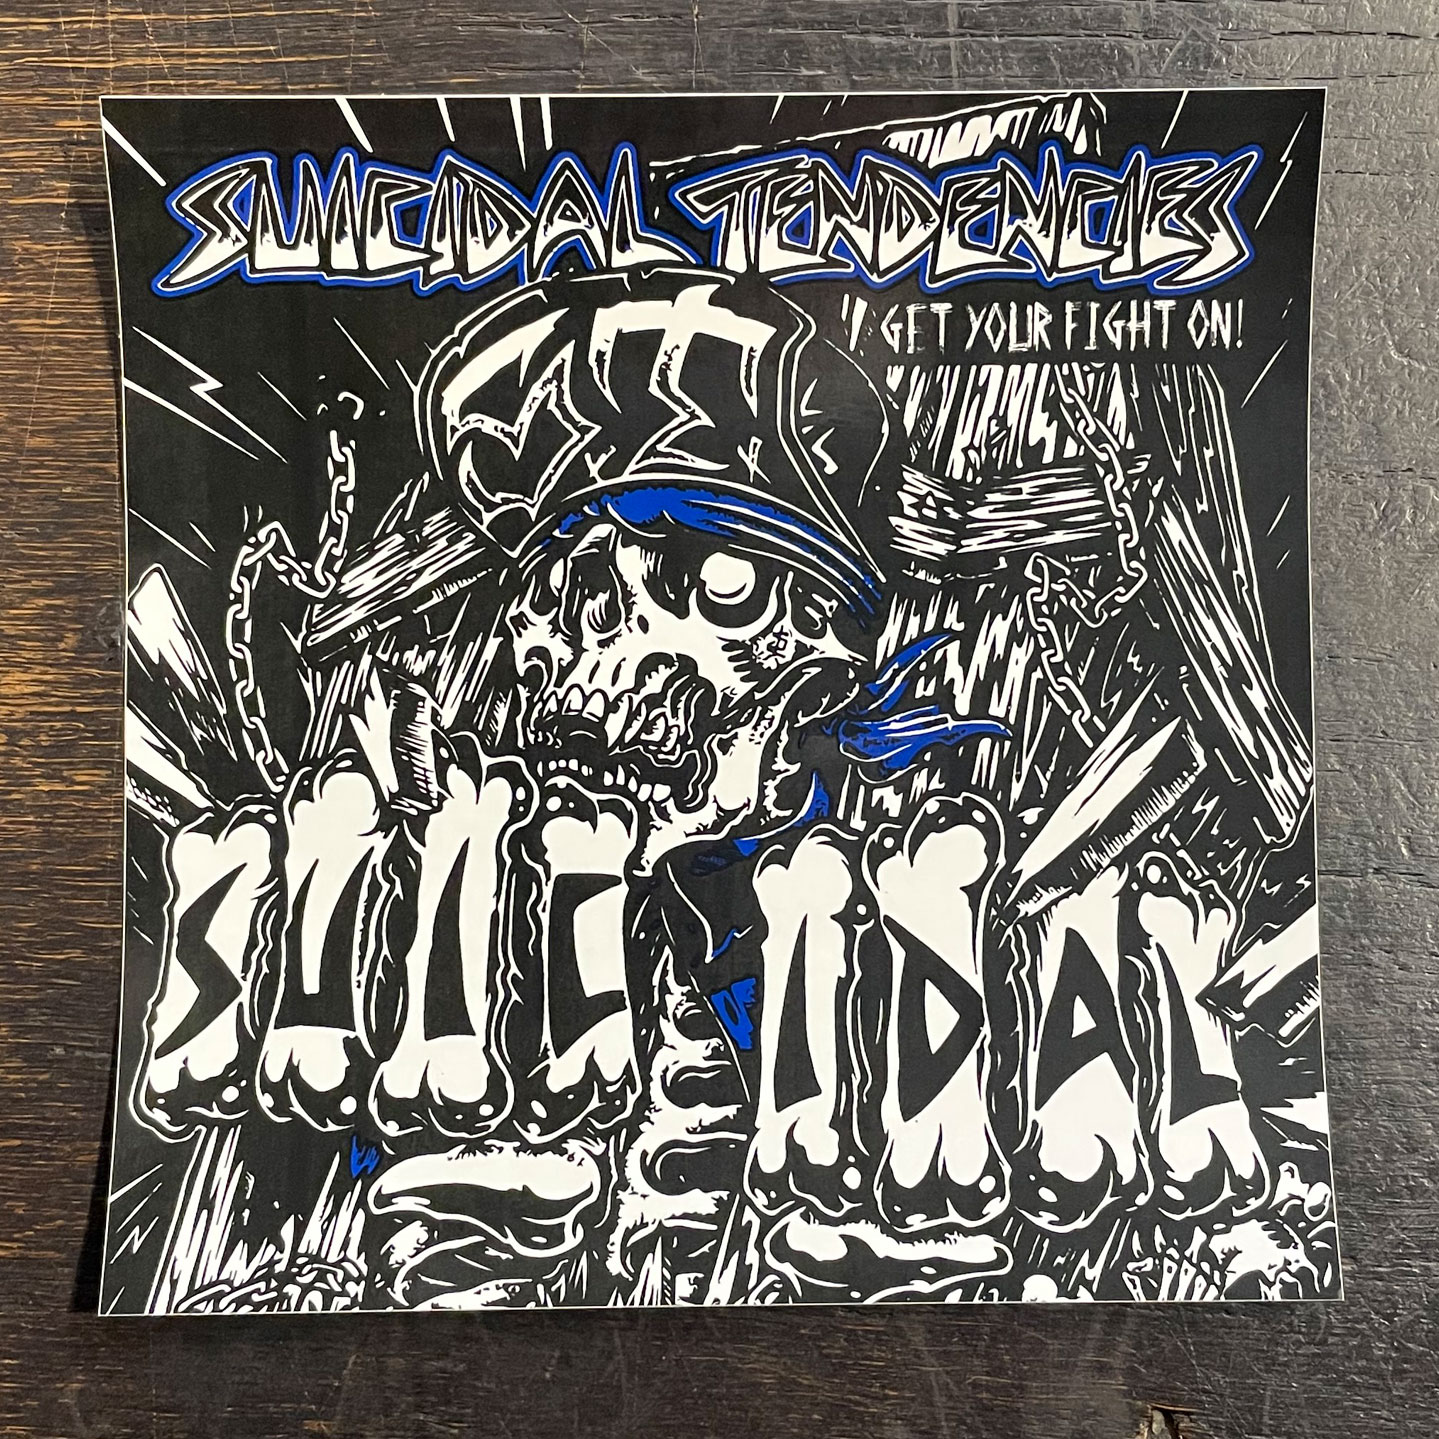 SUICIDAL TENDENCIES ステッカー GET YOUR FIGHT ON!